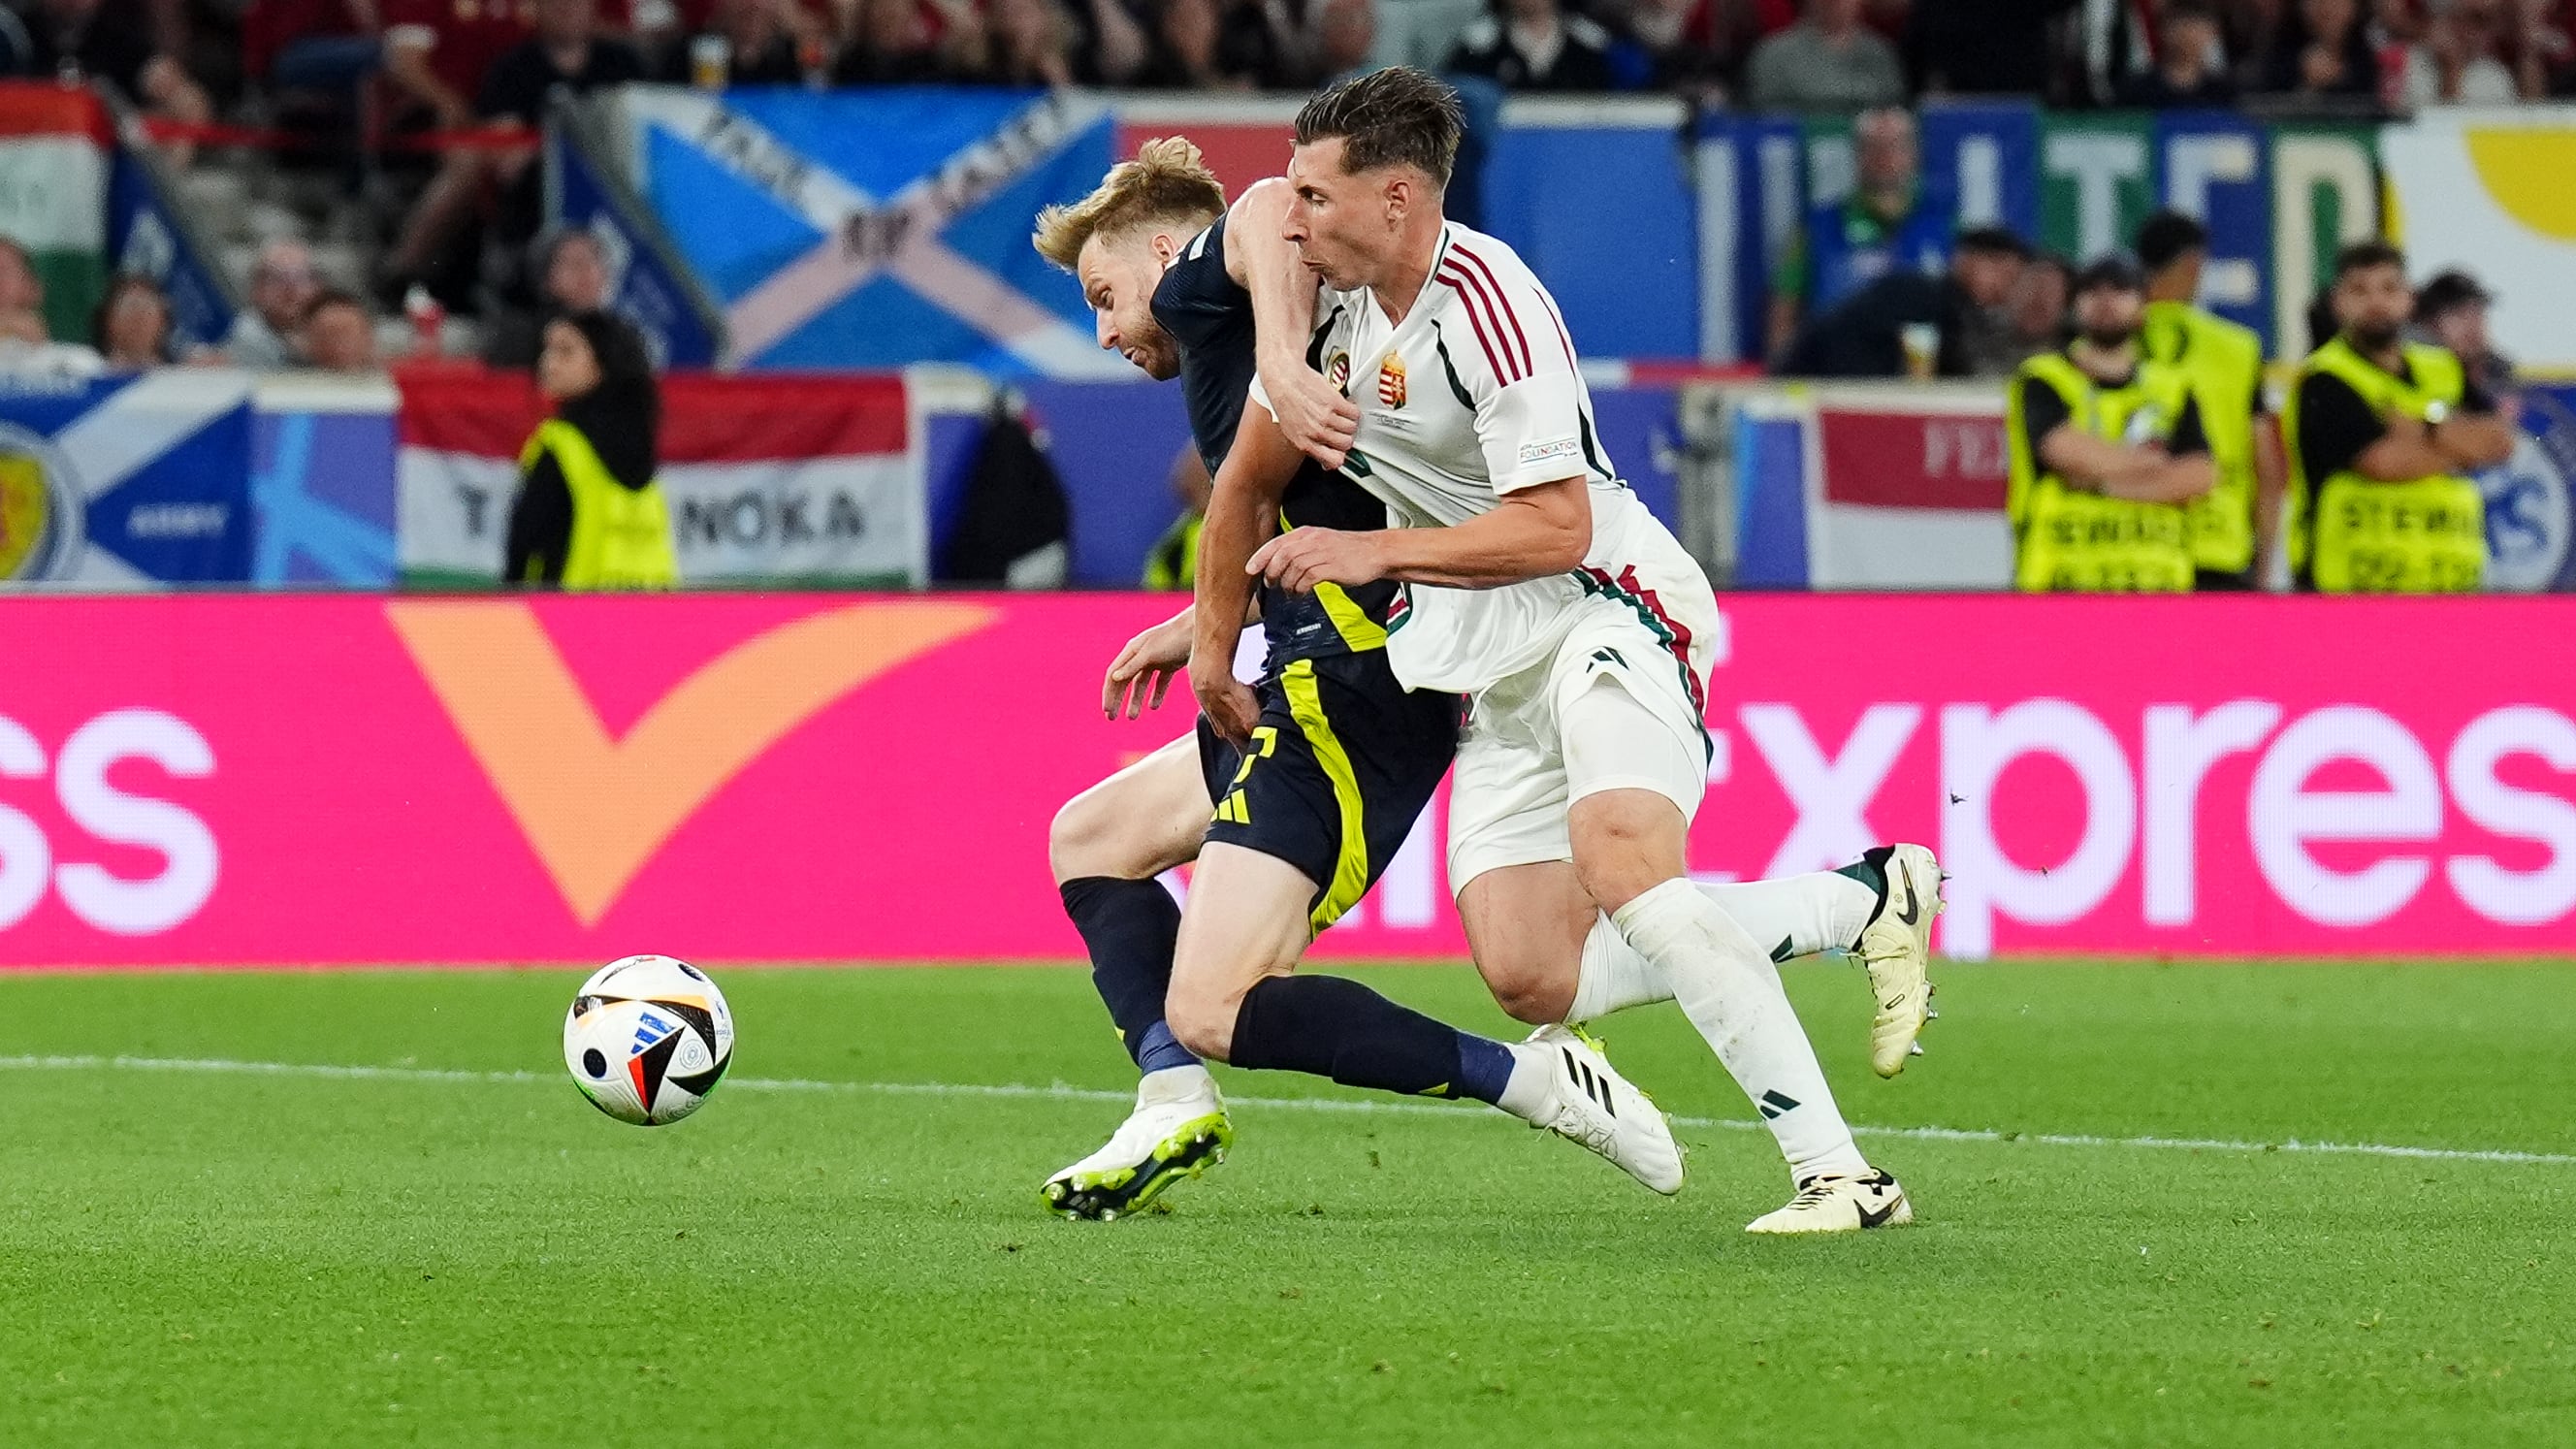 The VAR did check and clear the on-field decision not to award Scotland a penalty for a challenge on Stuart Armstrong in Sunday’s Euro 2024 defeat to Hungary, UEFA’s referees’ chief has said